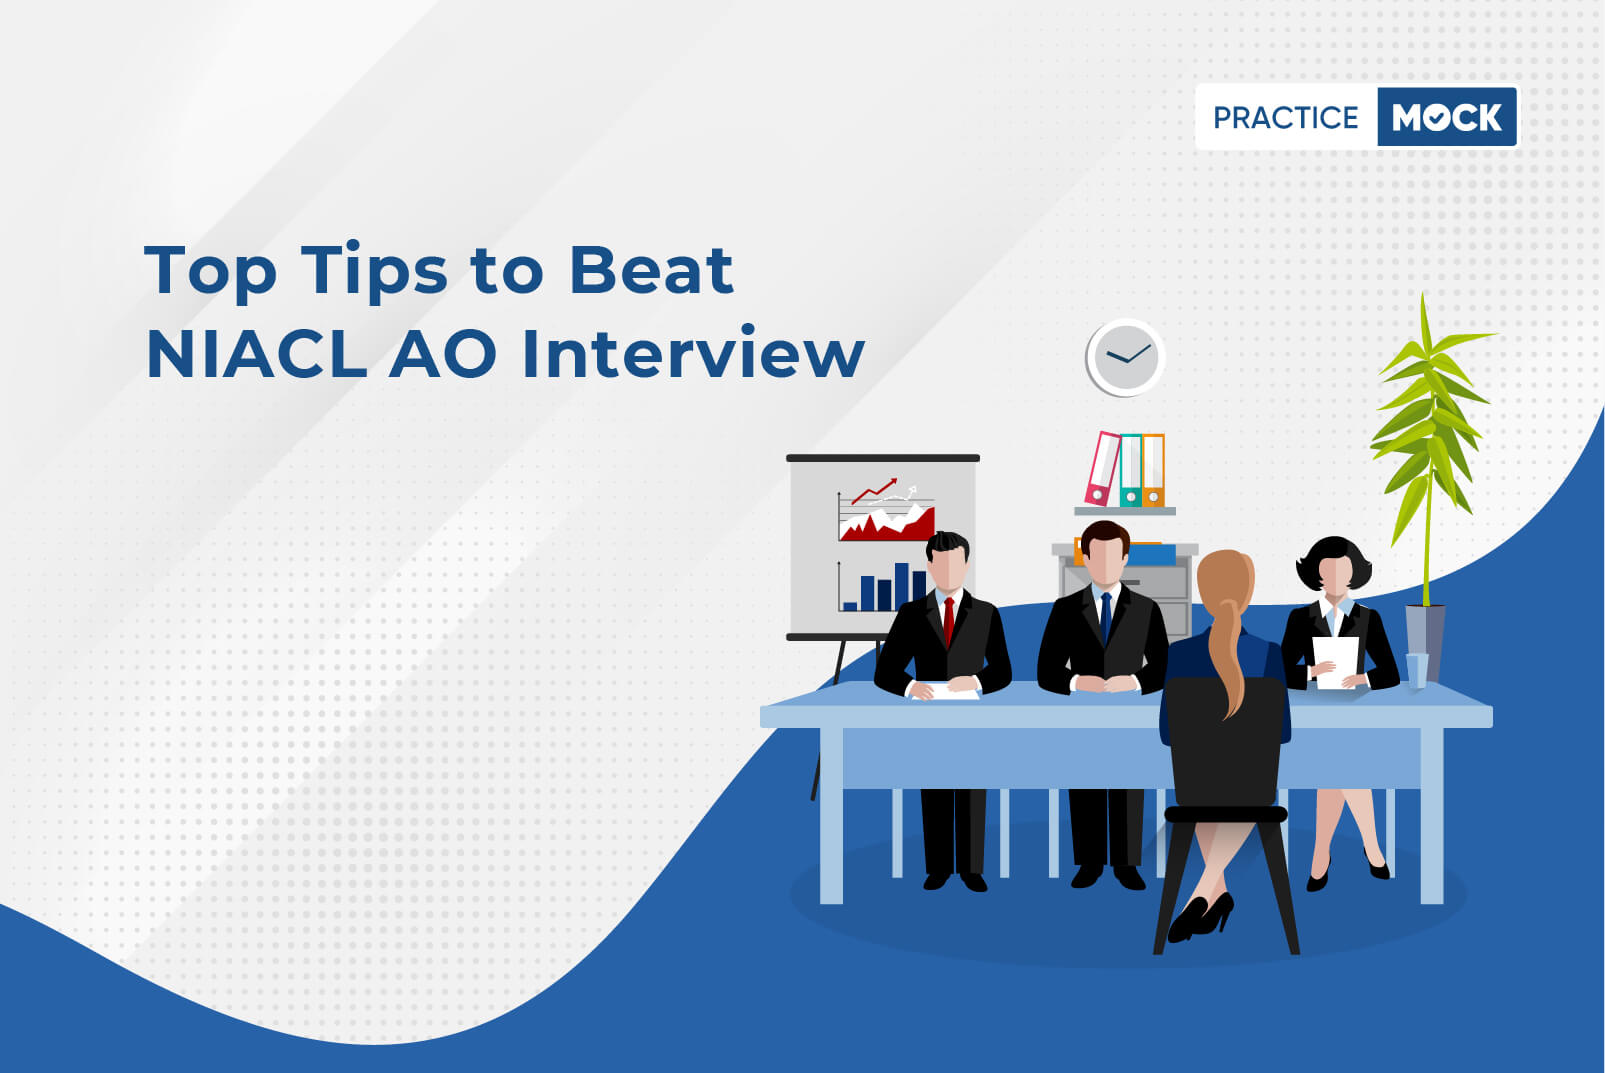 NIACL AO Interview Preparation Tips